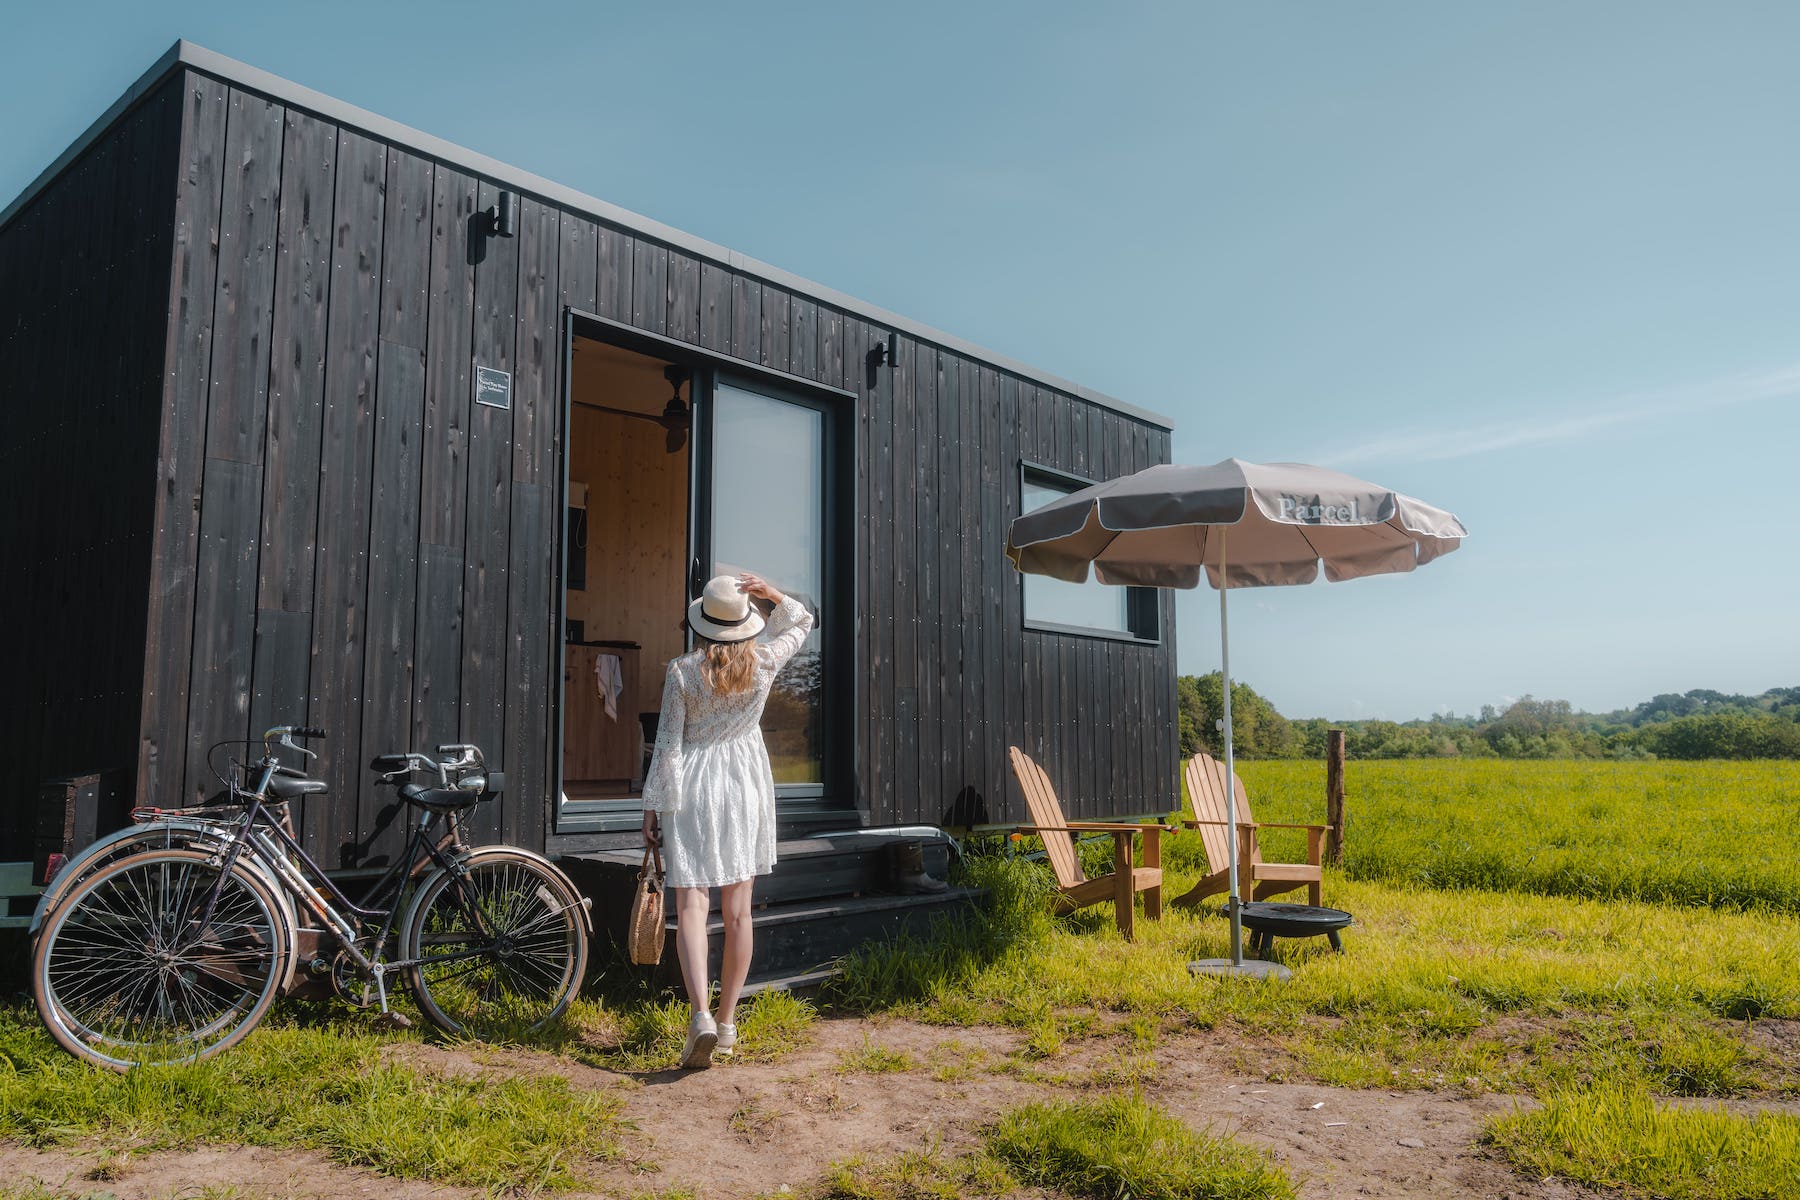 The Tiny House and its exterior